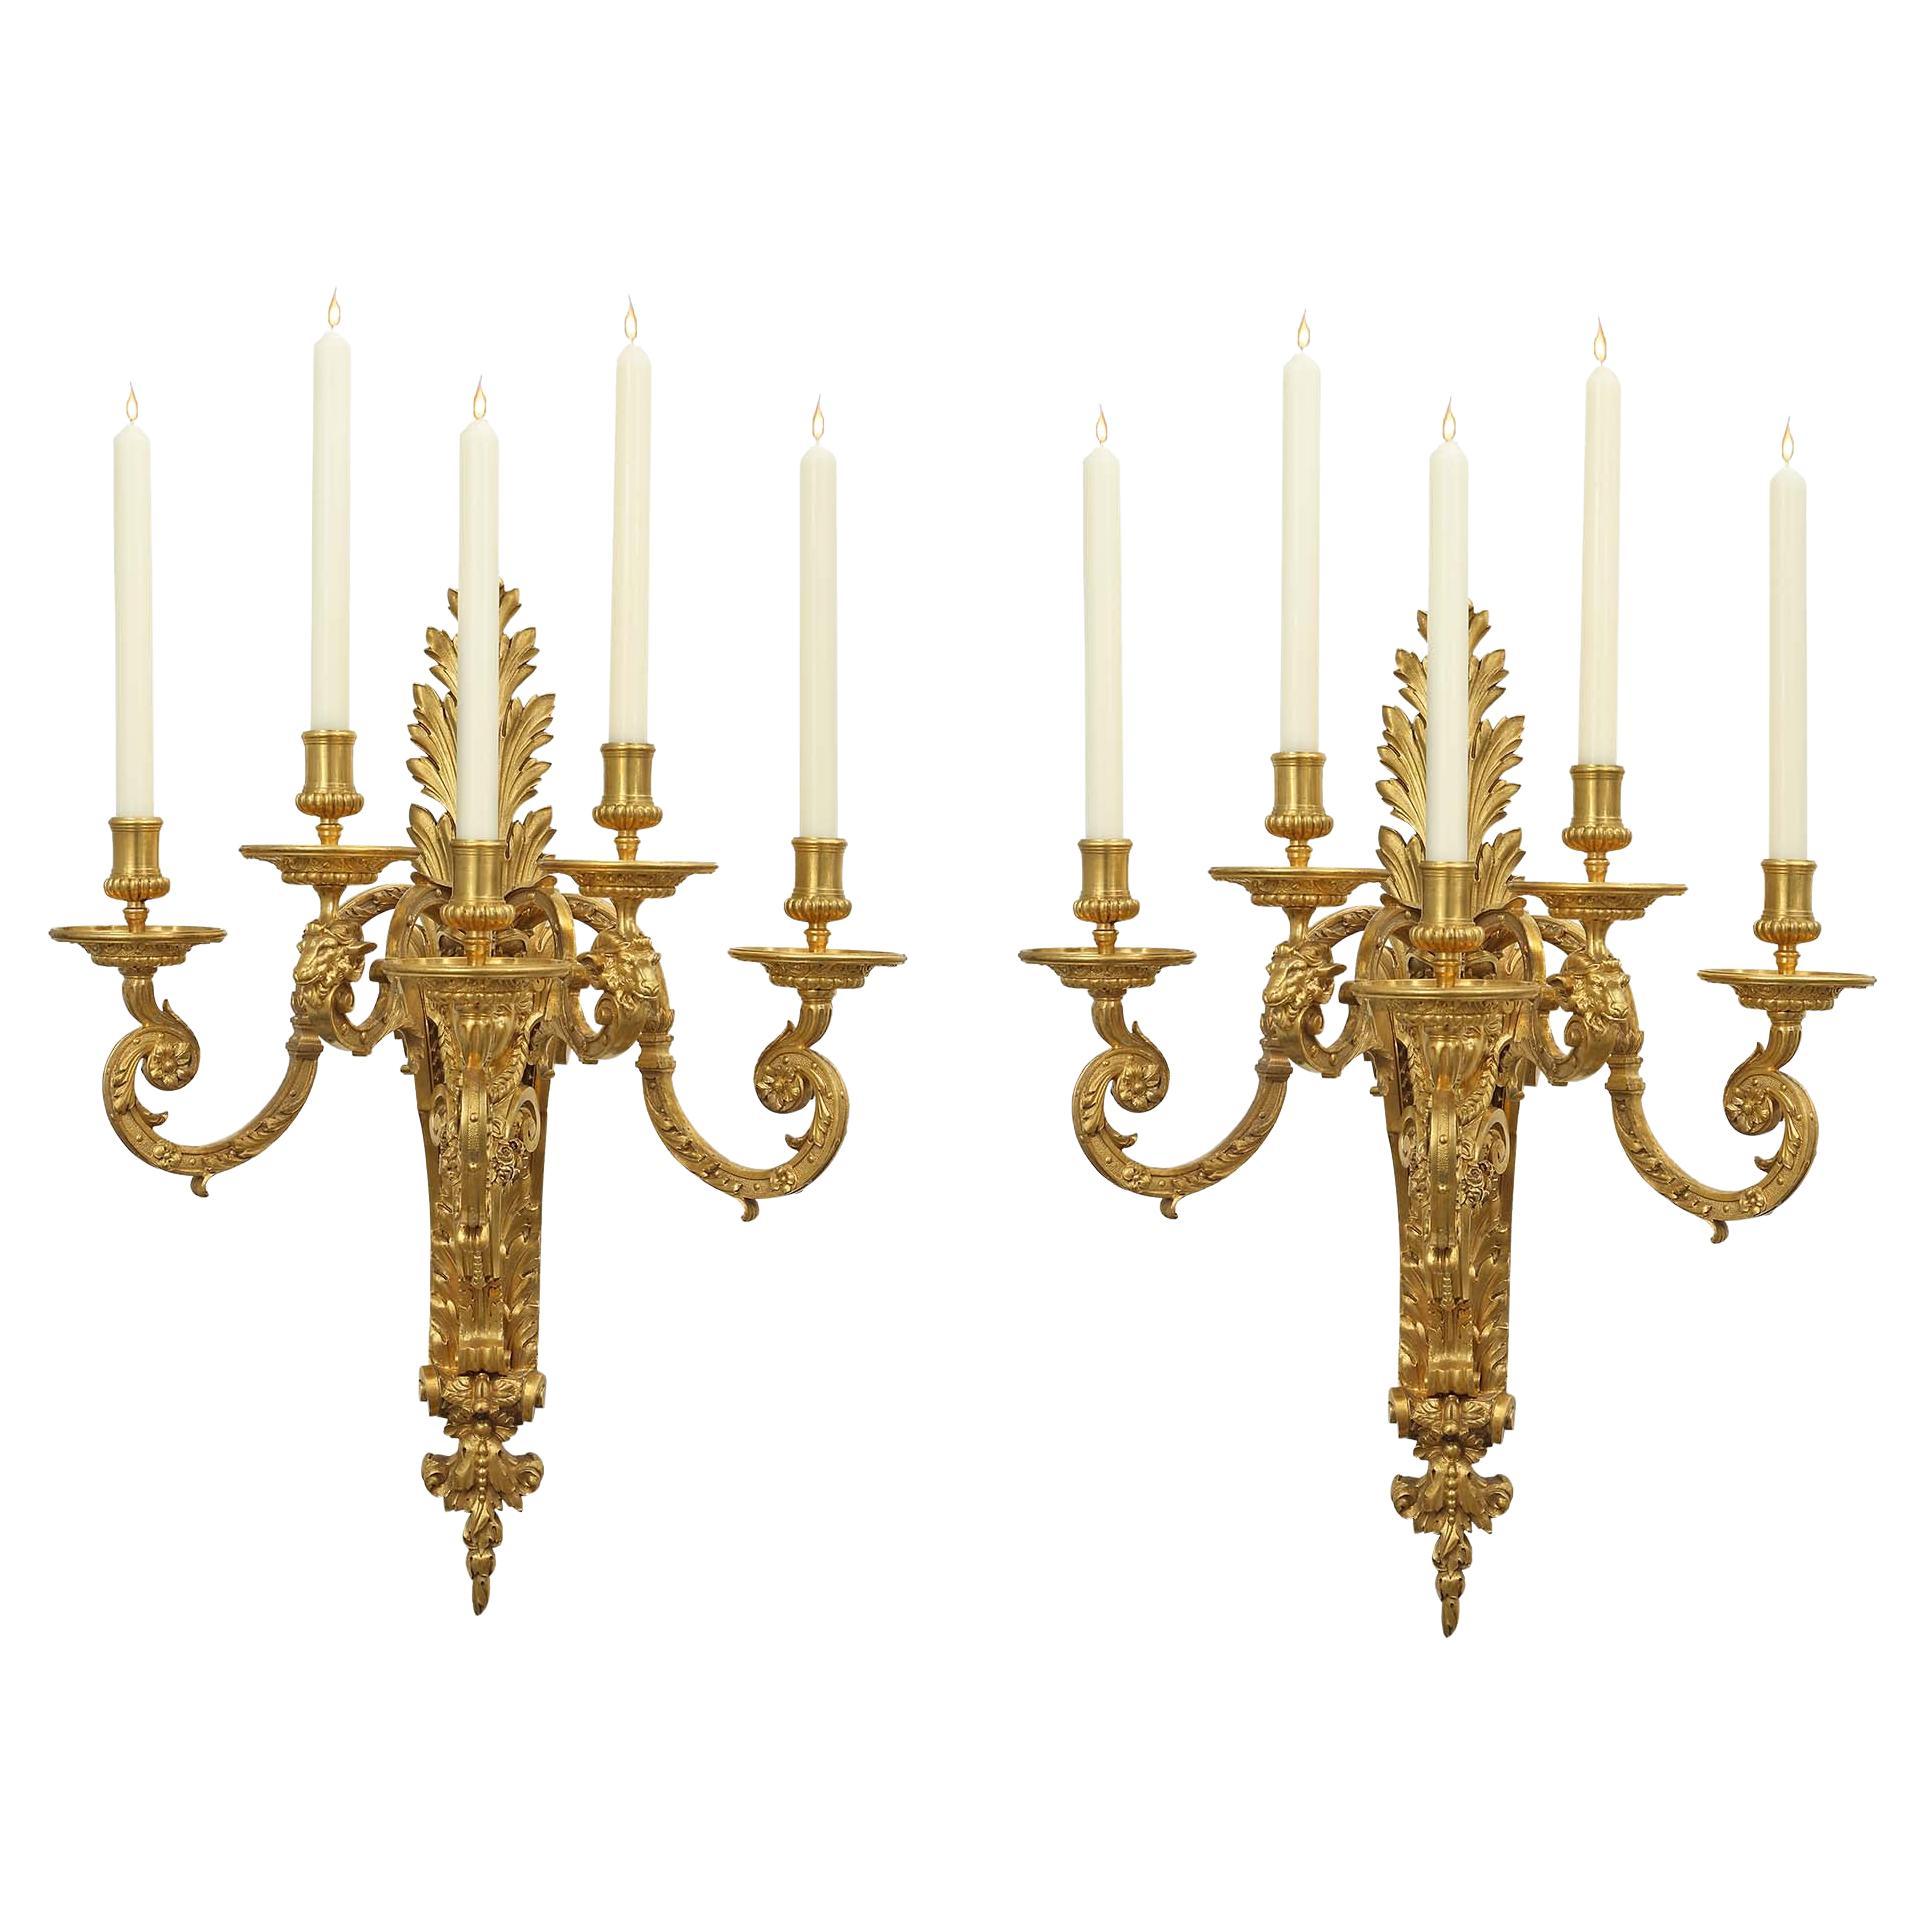 Pair of Mid-19th Century French Louis XIV St. Ormolu Five Arm Sconces